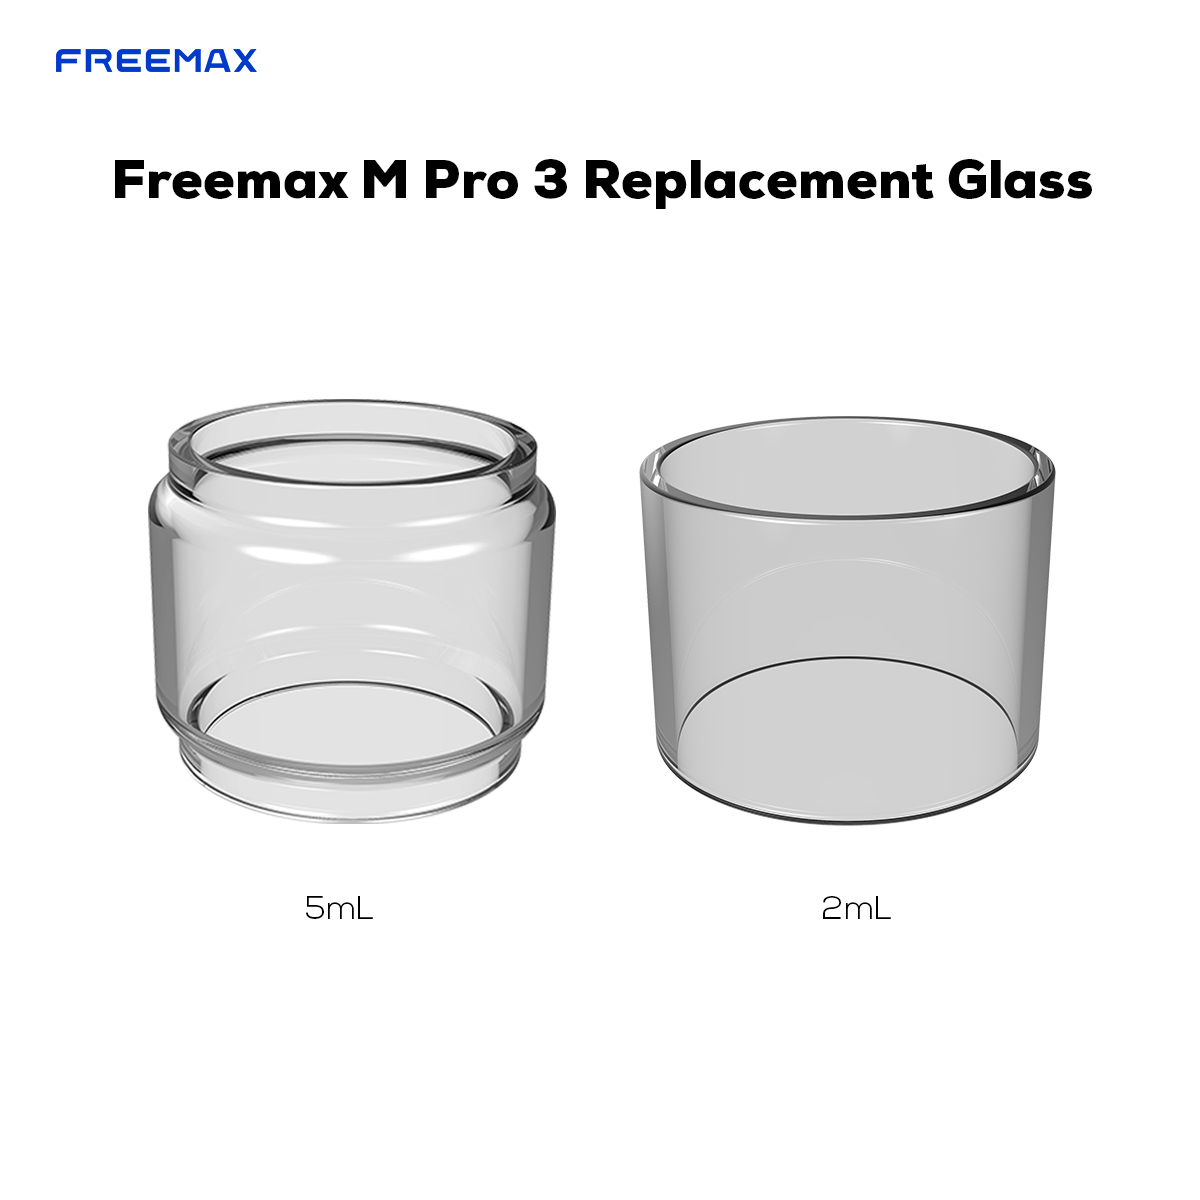 Freemax-M-Pro-3-Replacement-Glass